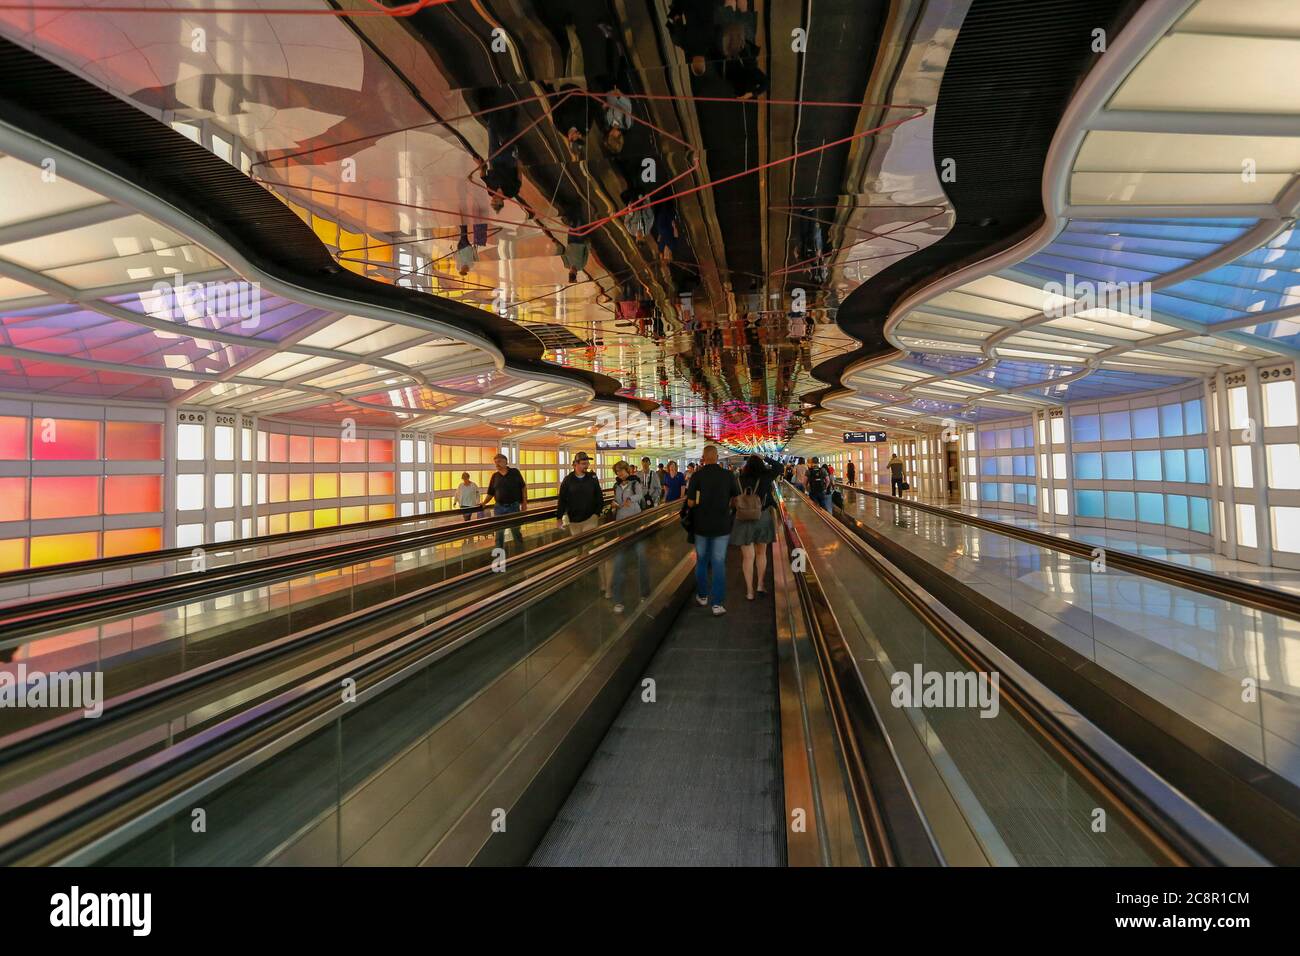 Chicago, IL, USA - July 20, 2018: Underground passage connecting terminals of the Chicago O'Hare airport Stock Photo